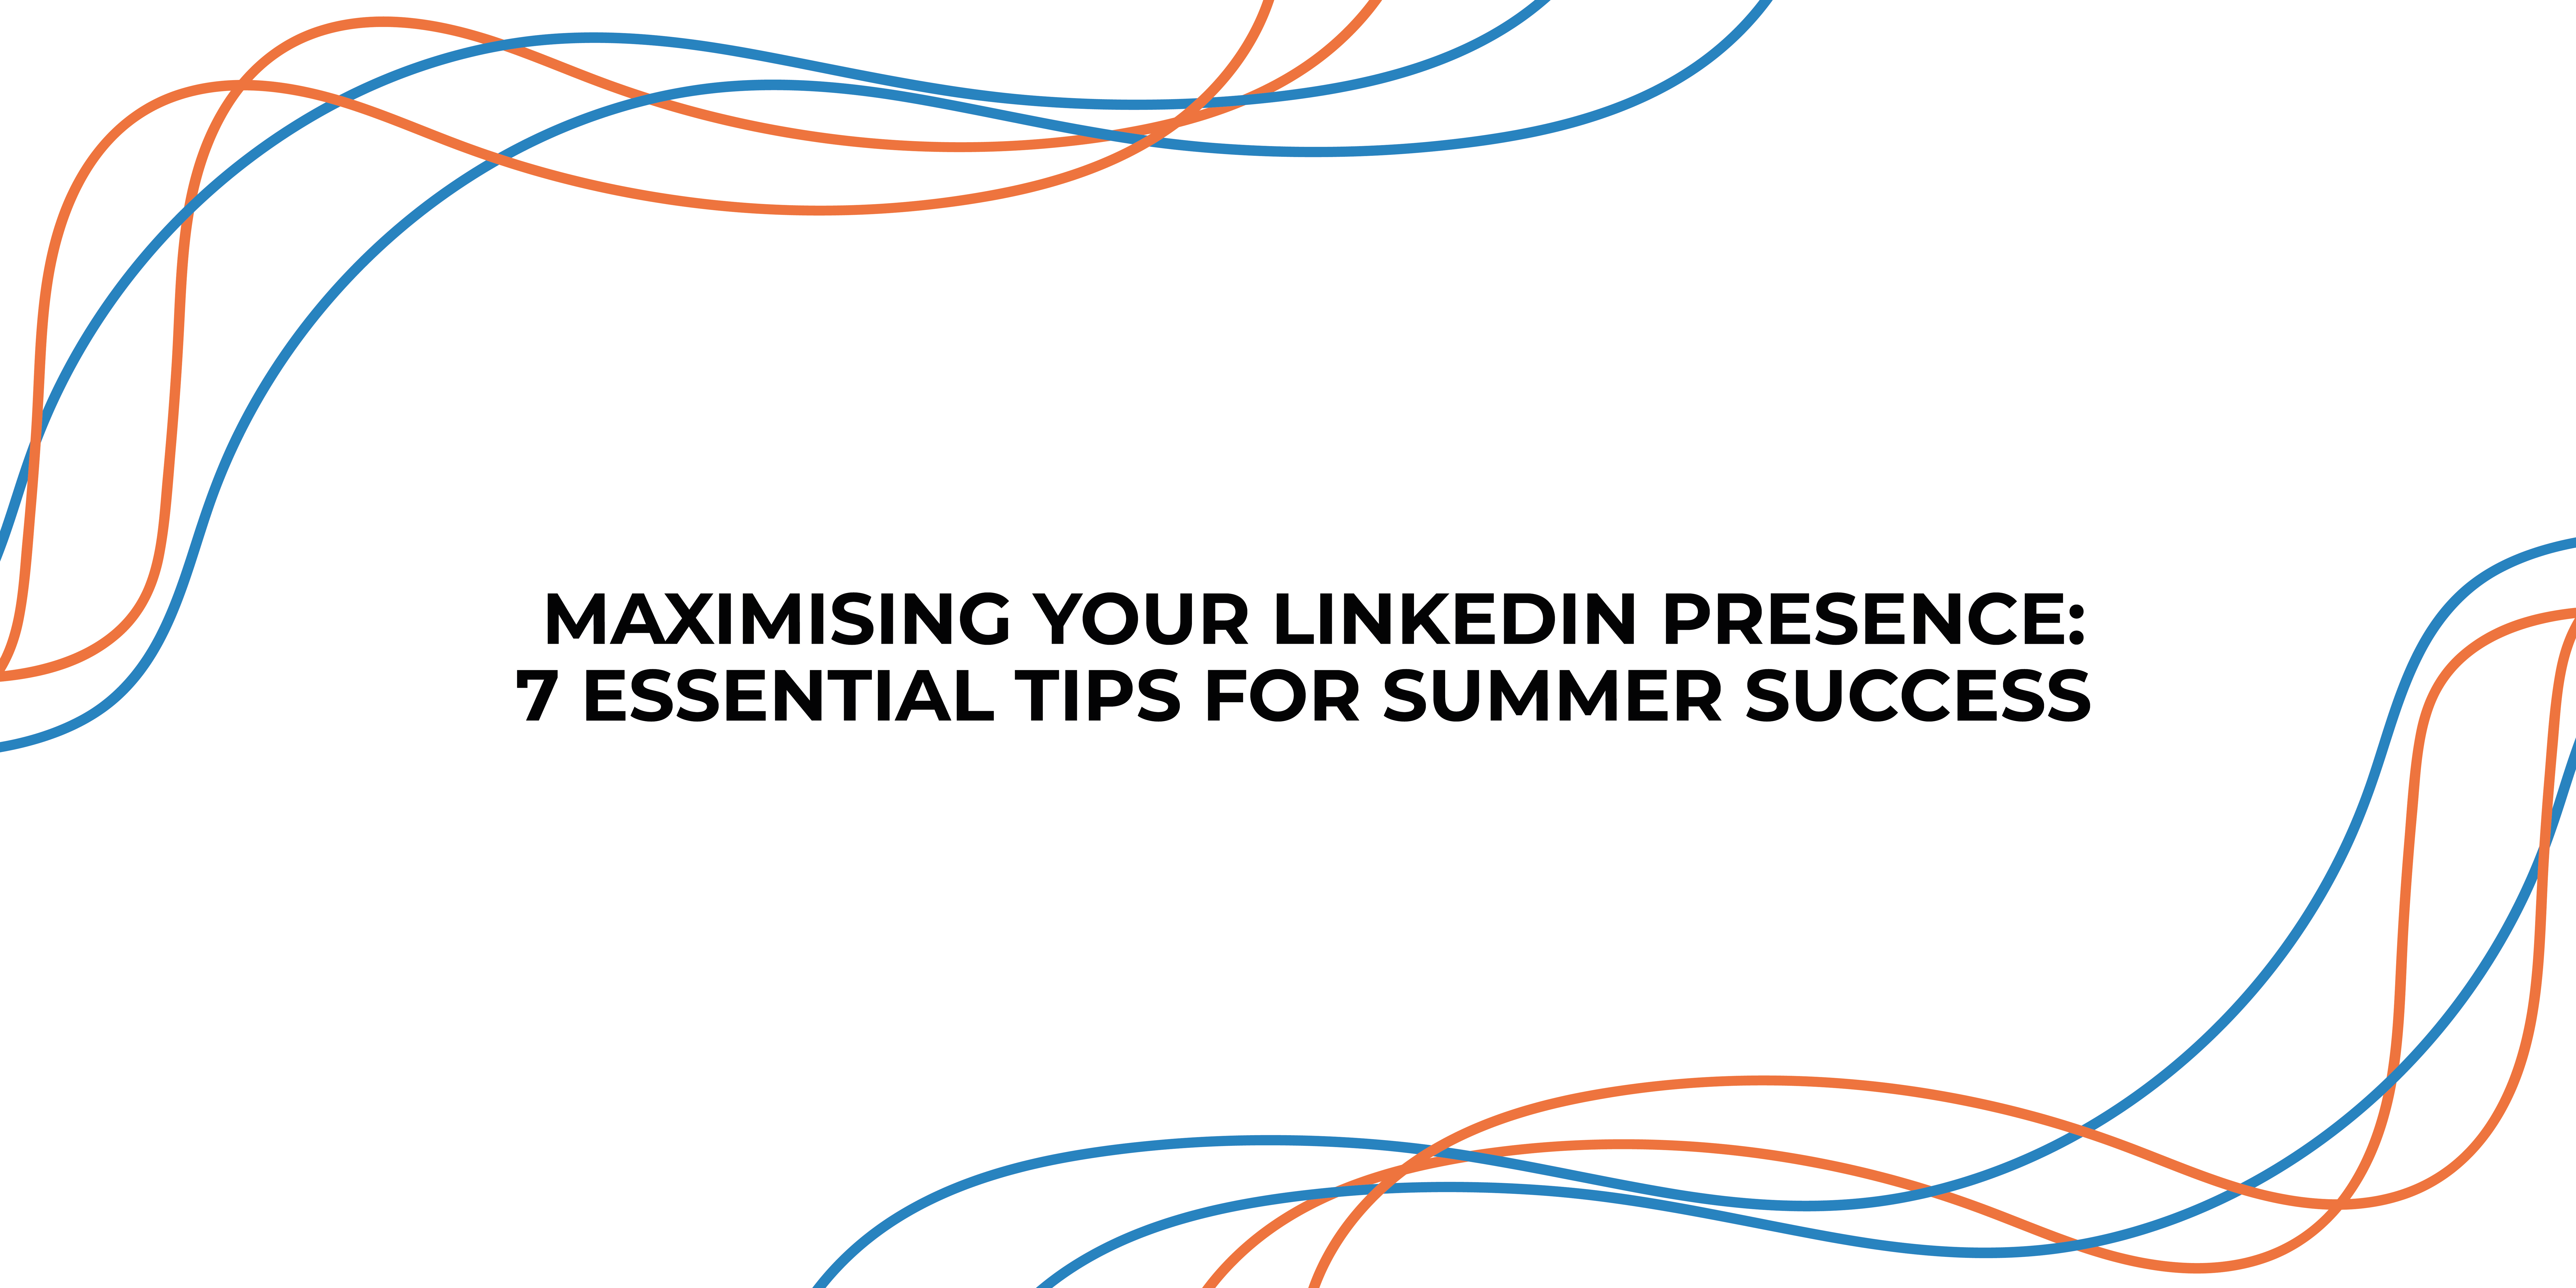 Maximizing Your LinkedIn Presence: 7 Essential Tips for Summer Success